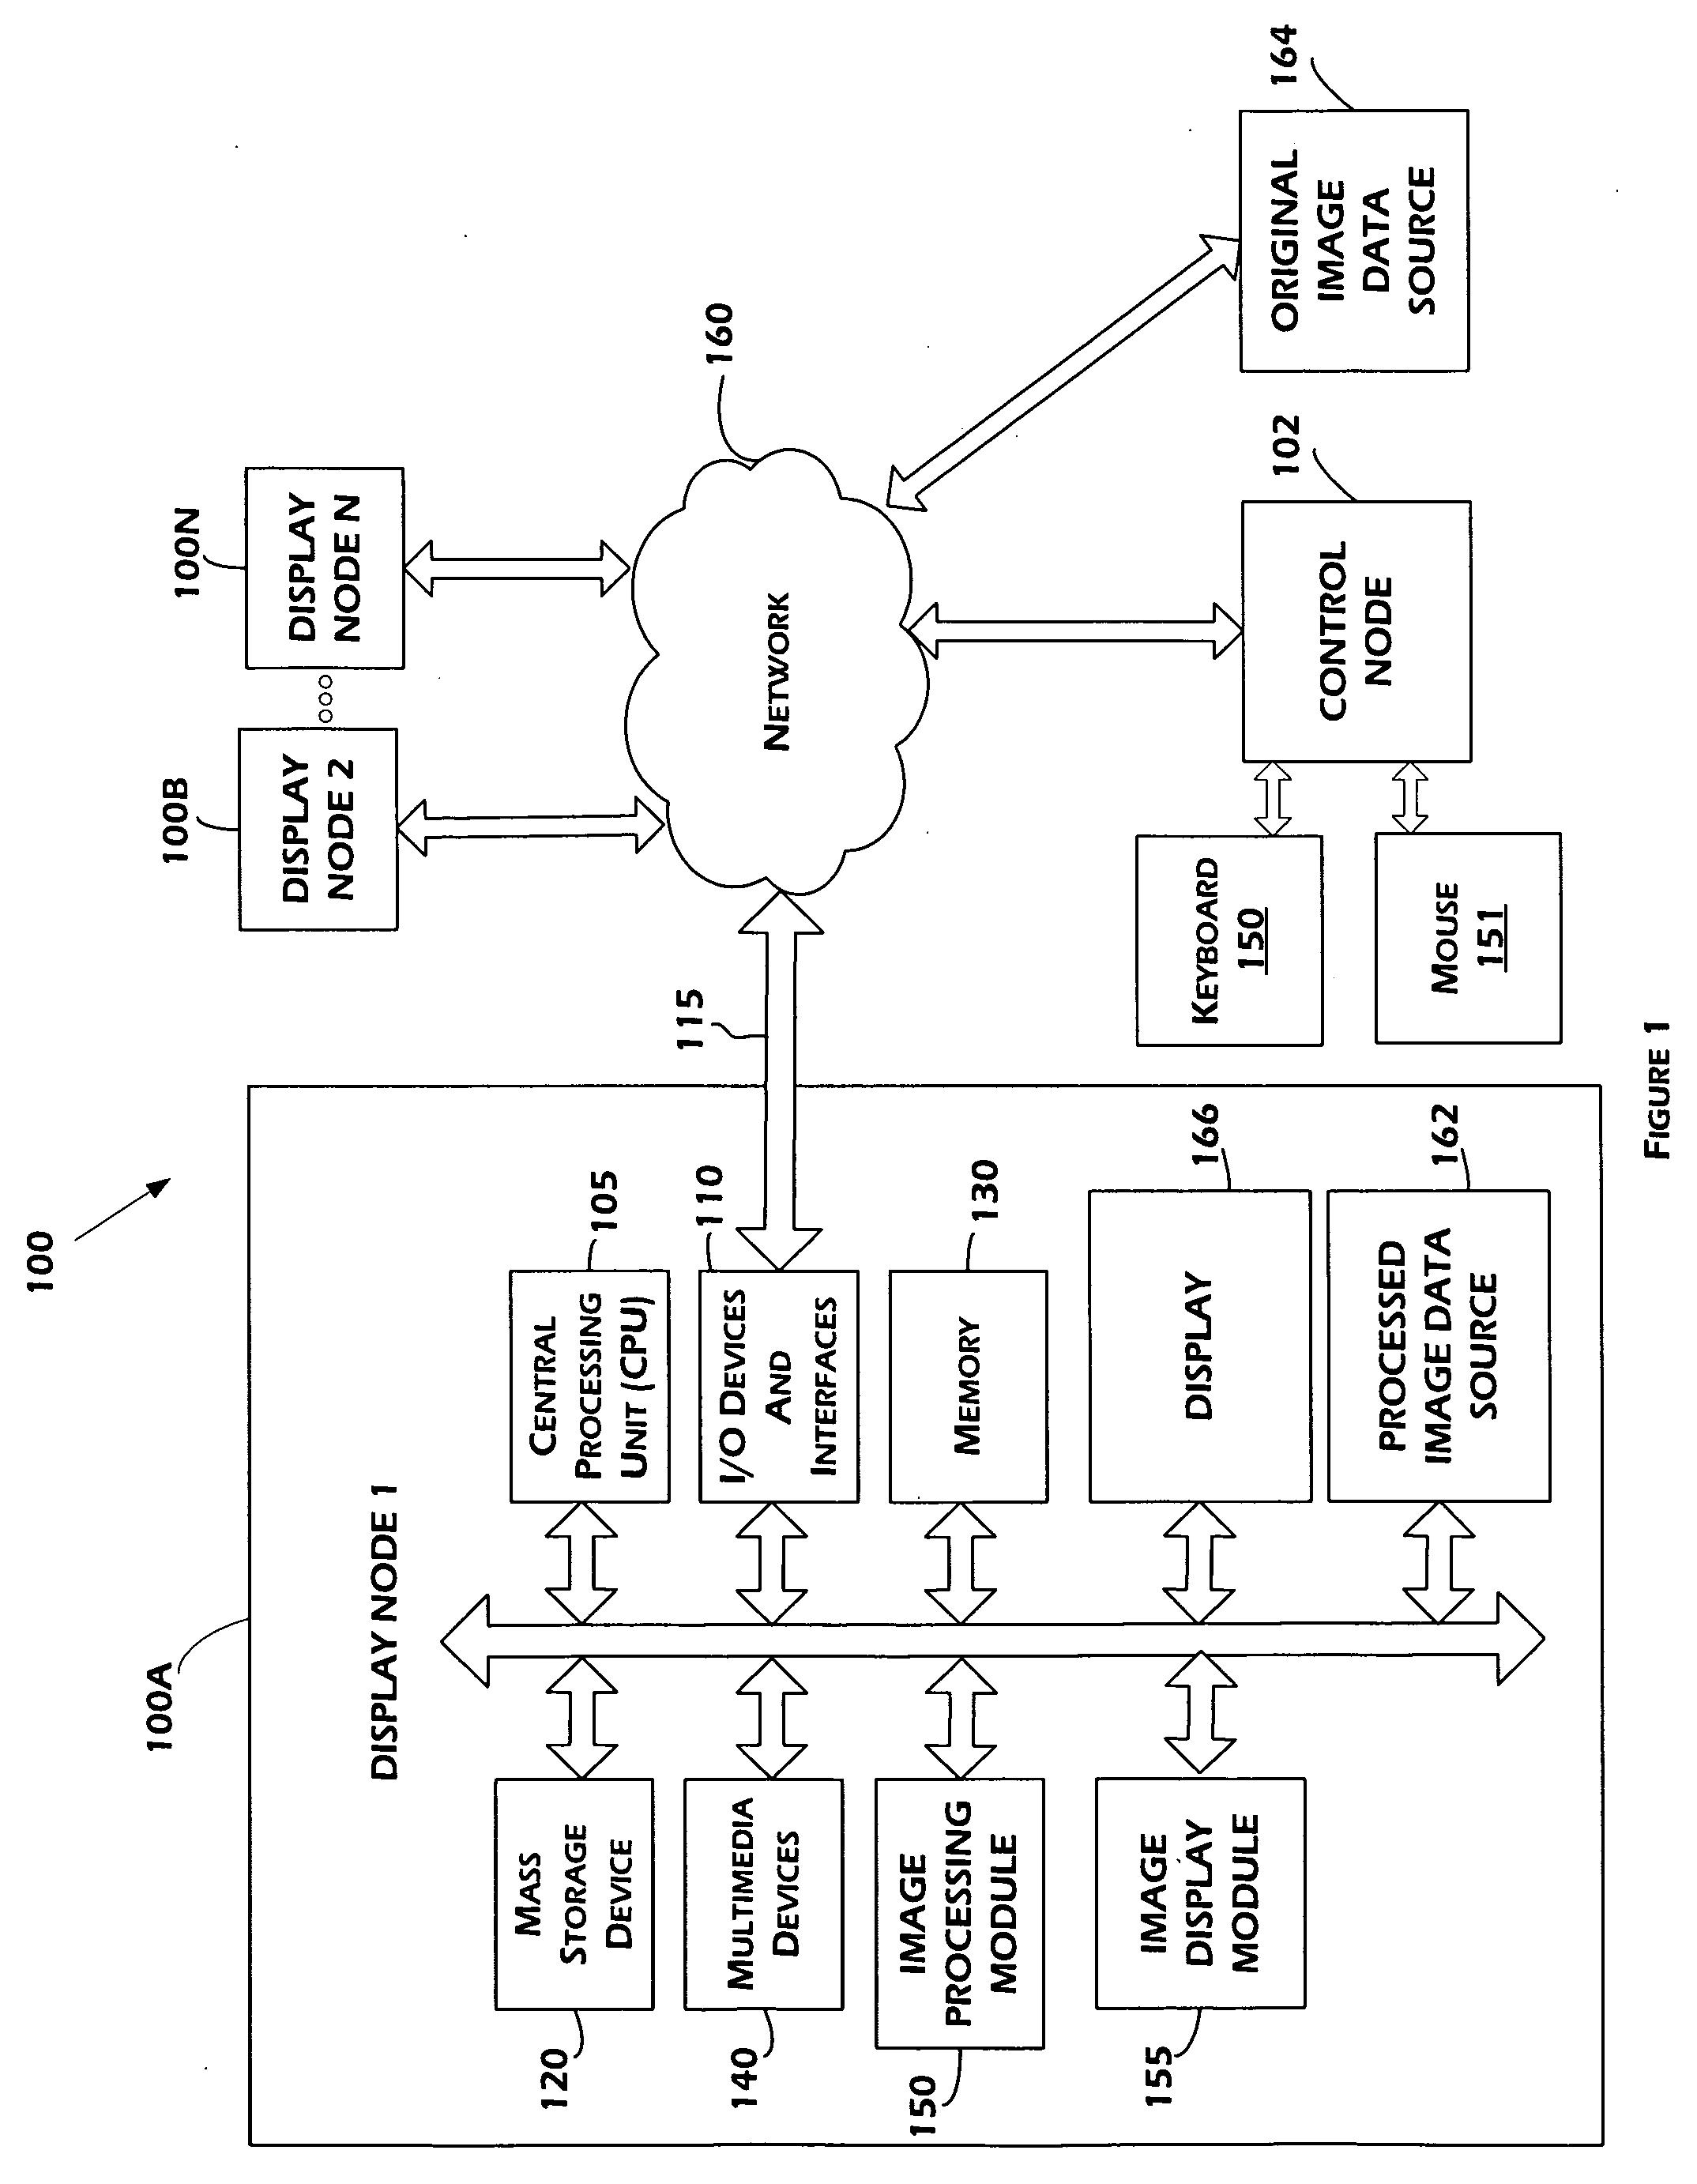 Systems, methods, and devices for dynamic management of data streams updating displays